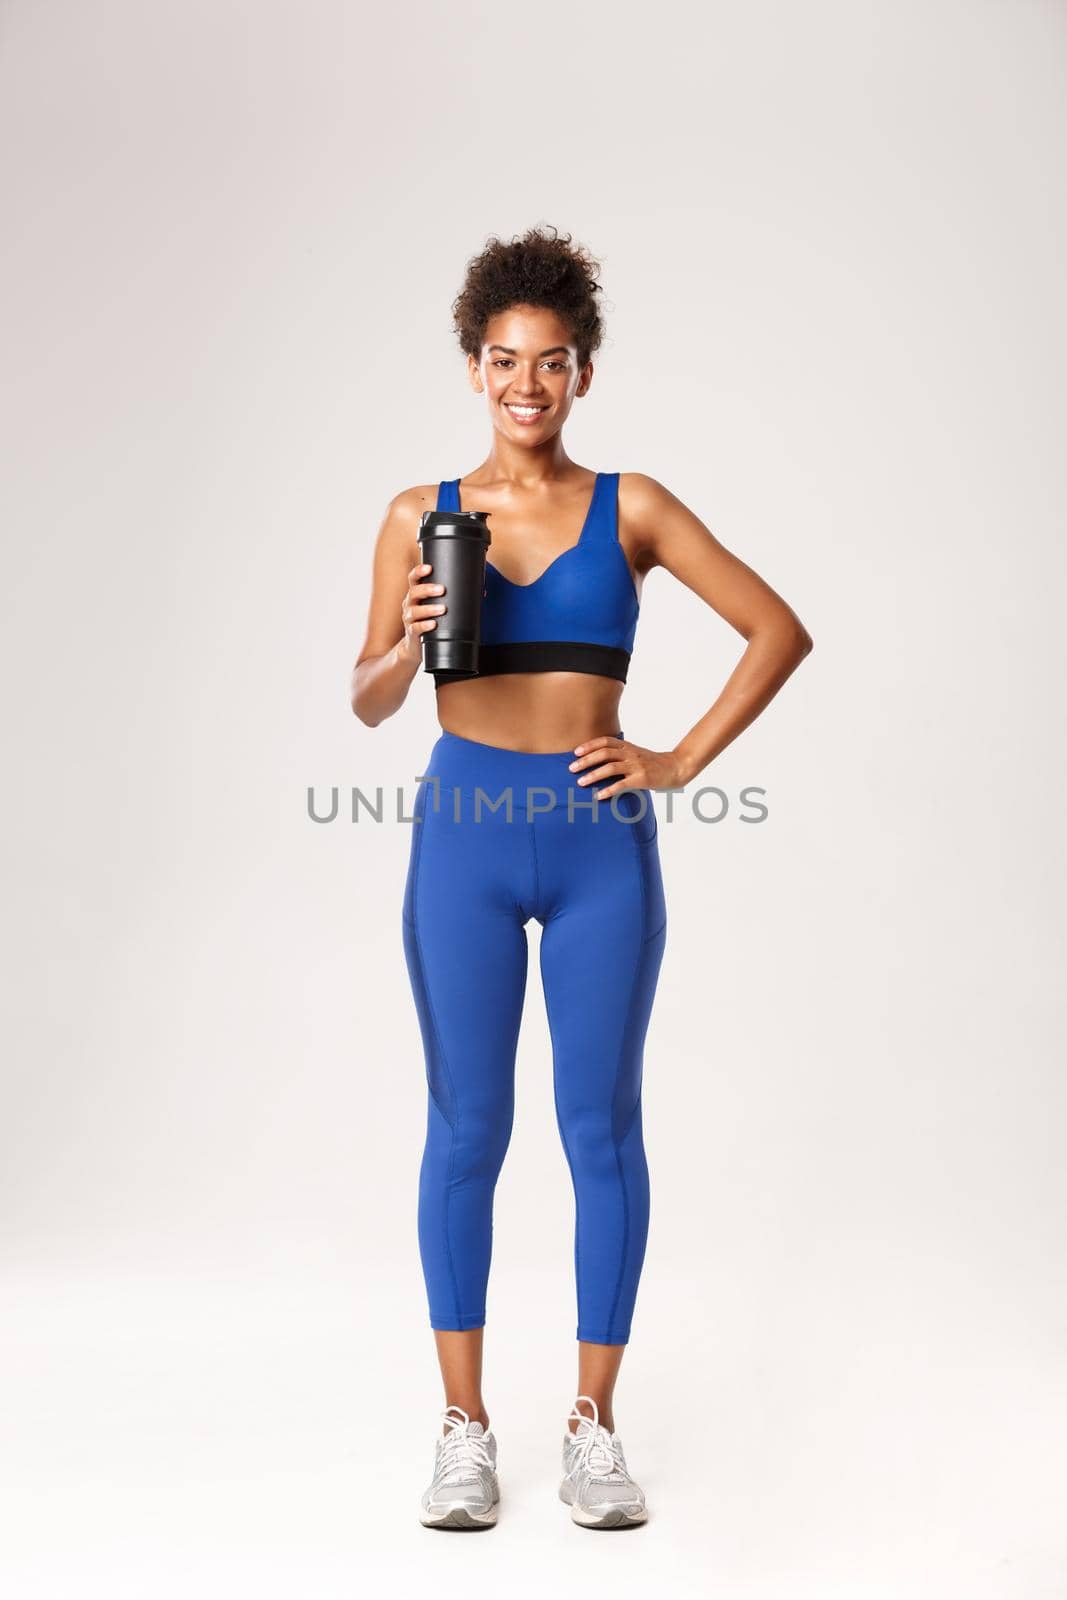 Full length of beautiful african-american fitness woman in blue uniform looking happy, drinking water from bottle, standing against white background.